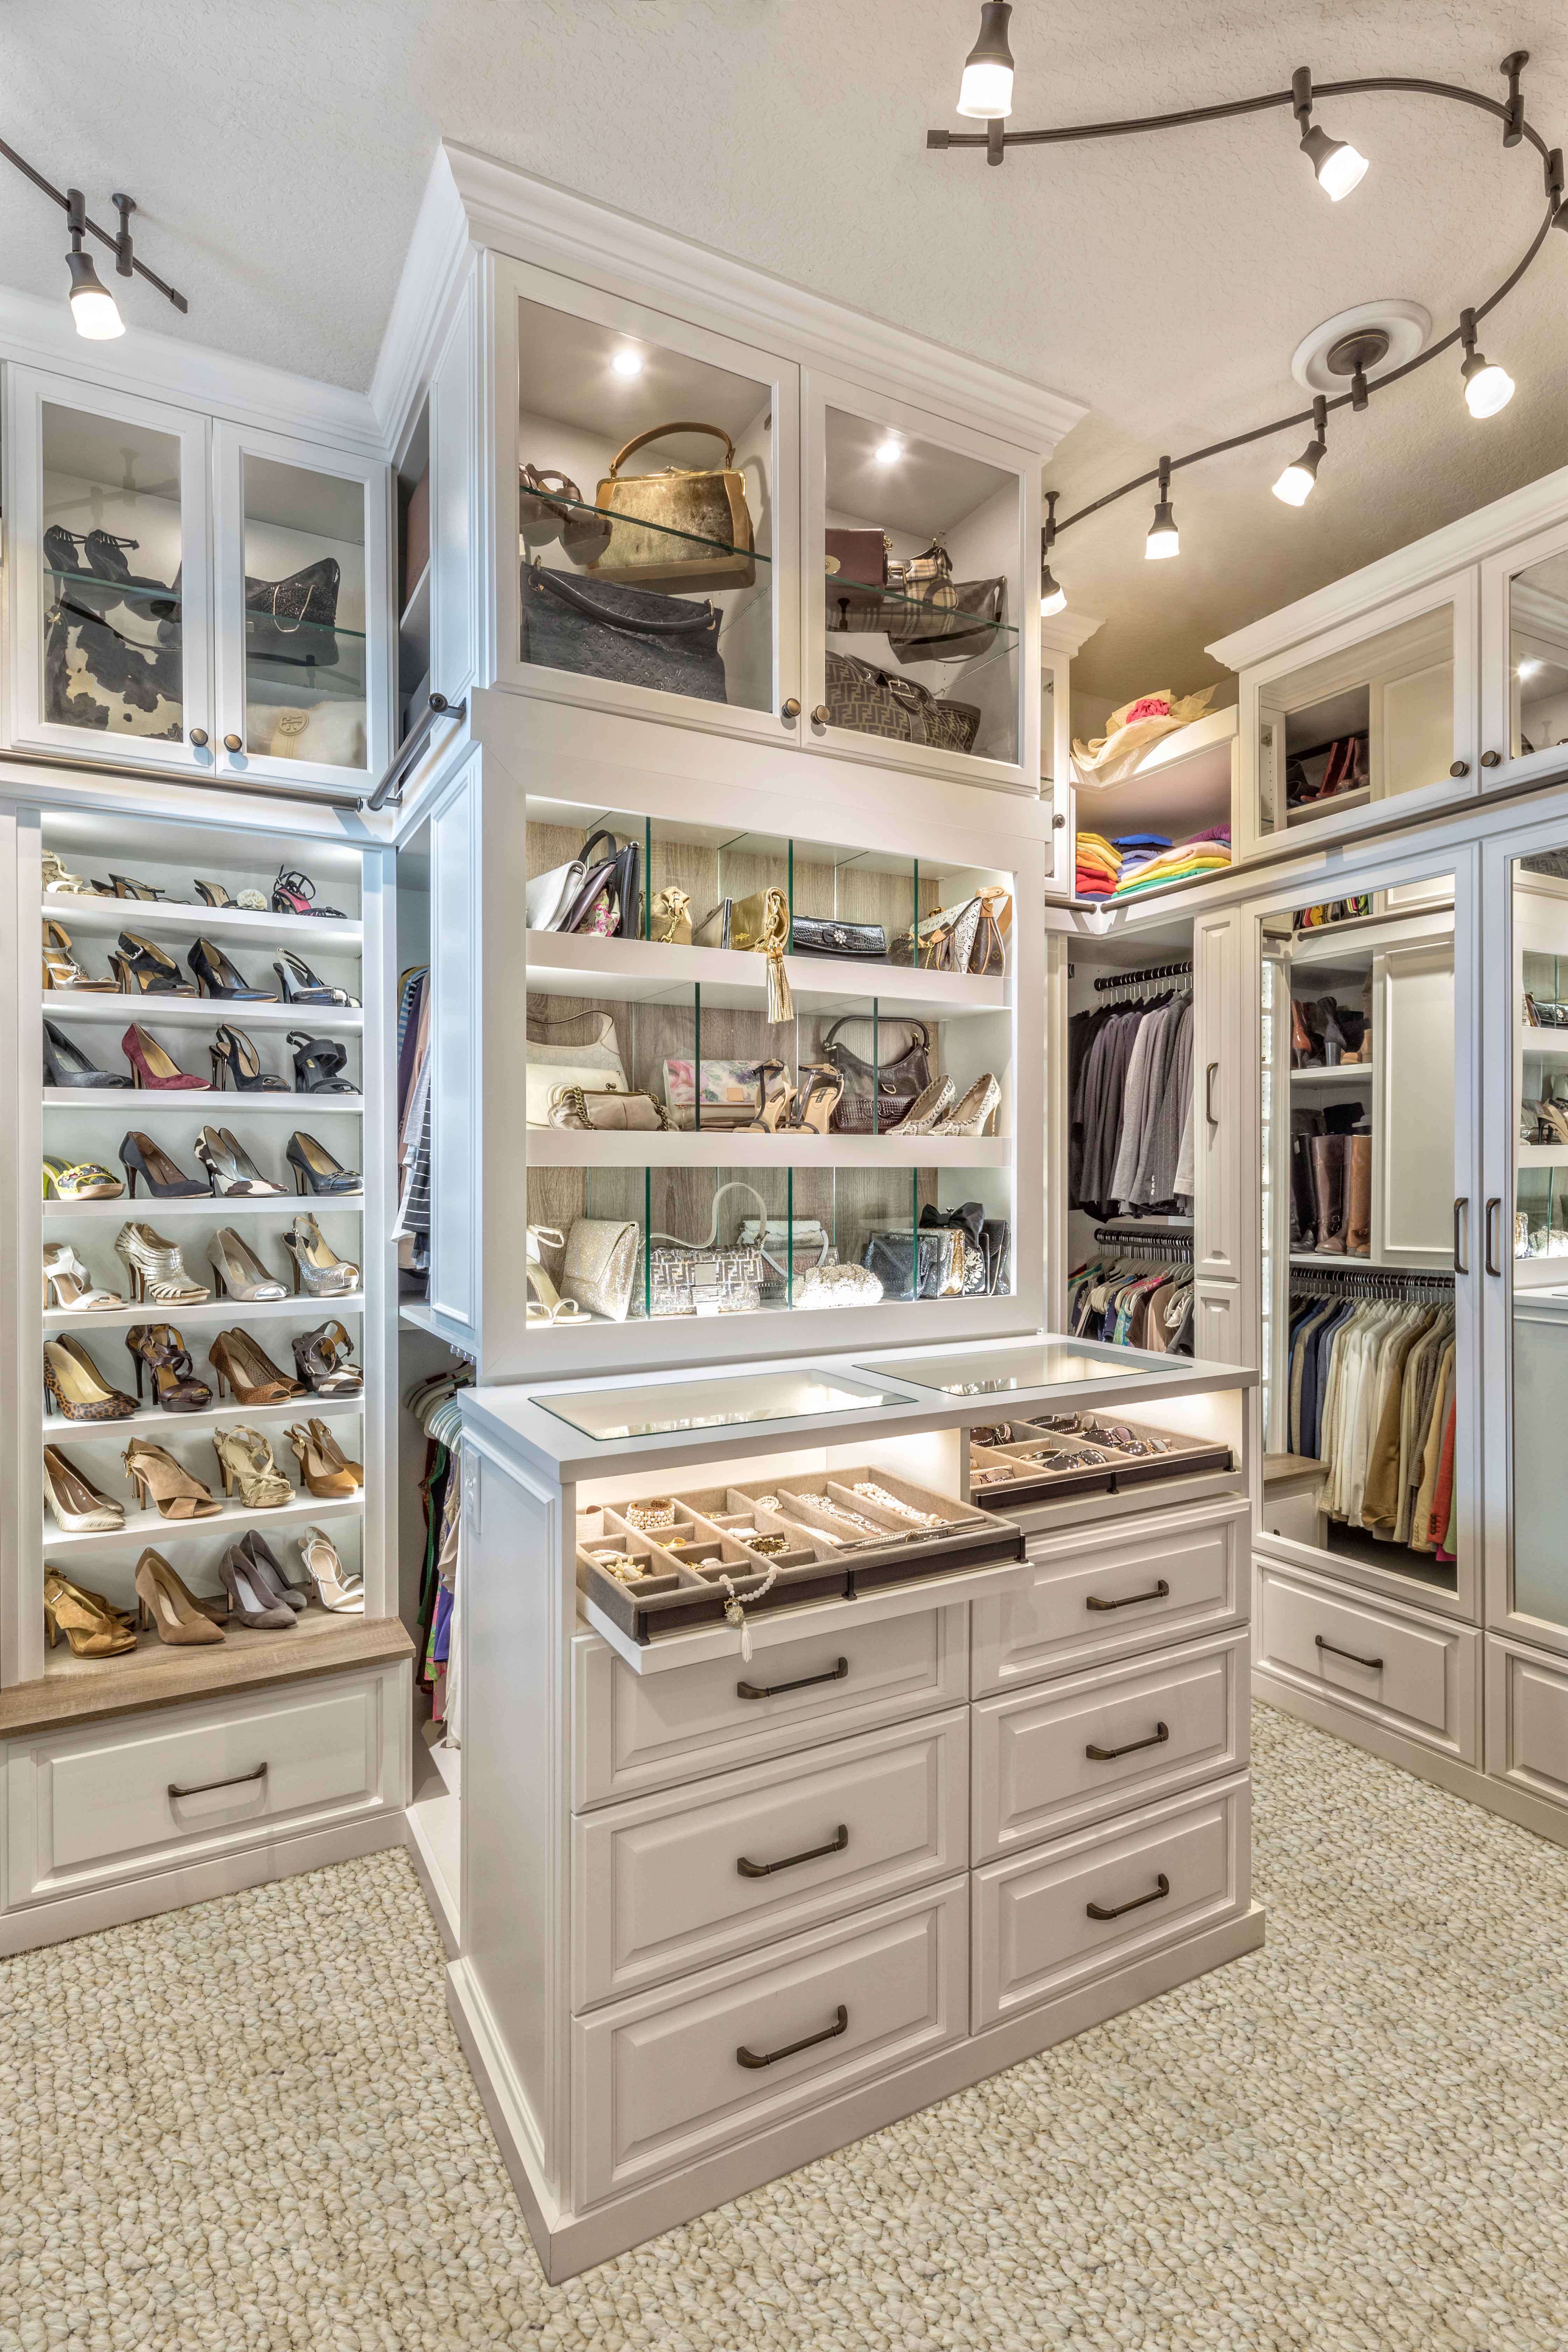 Four Basic Strategies To Create The Perfect Curated Walk In Closet